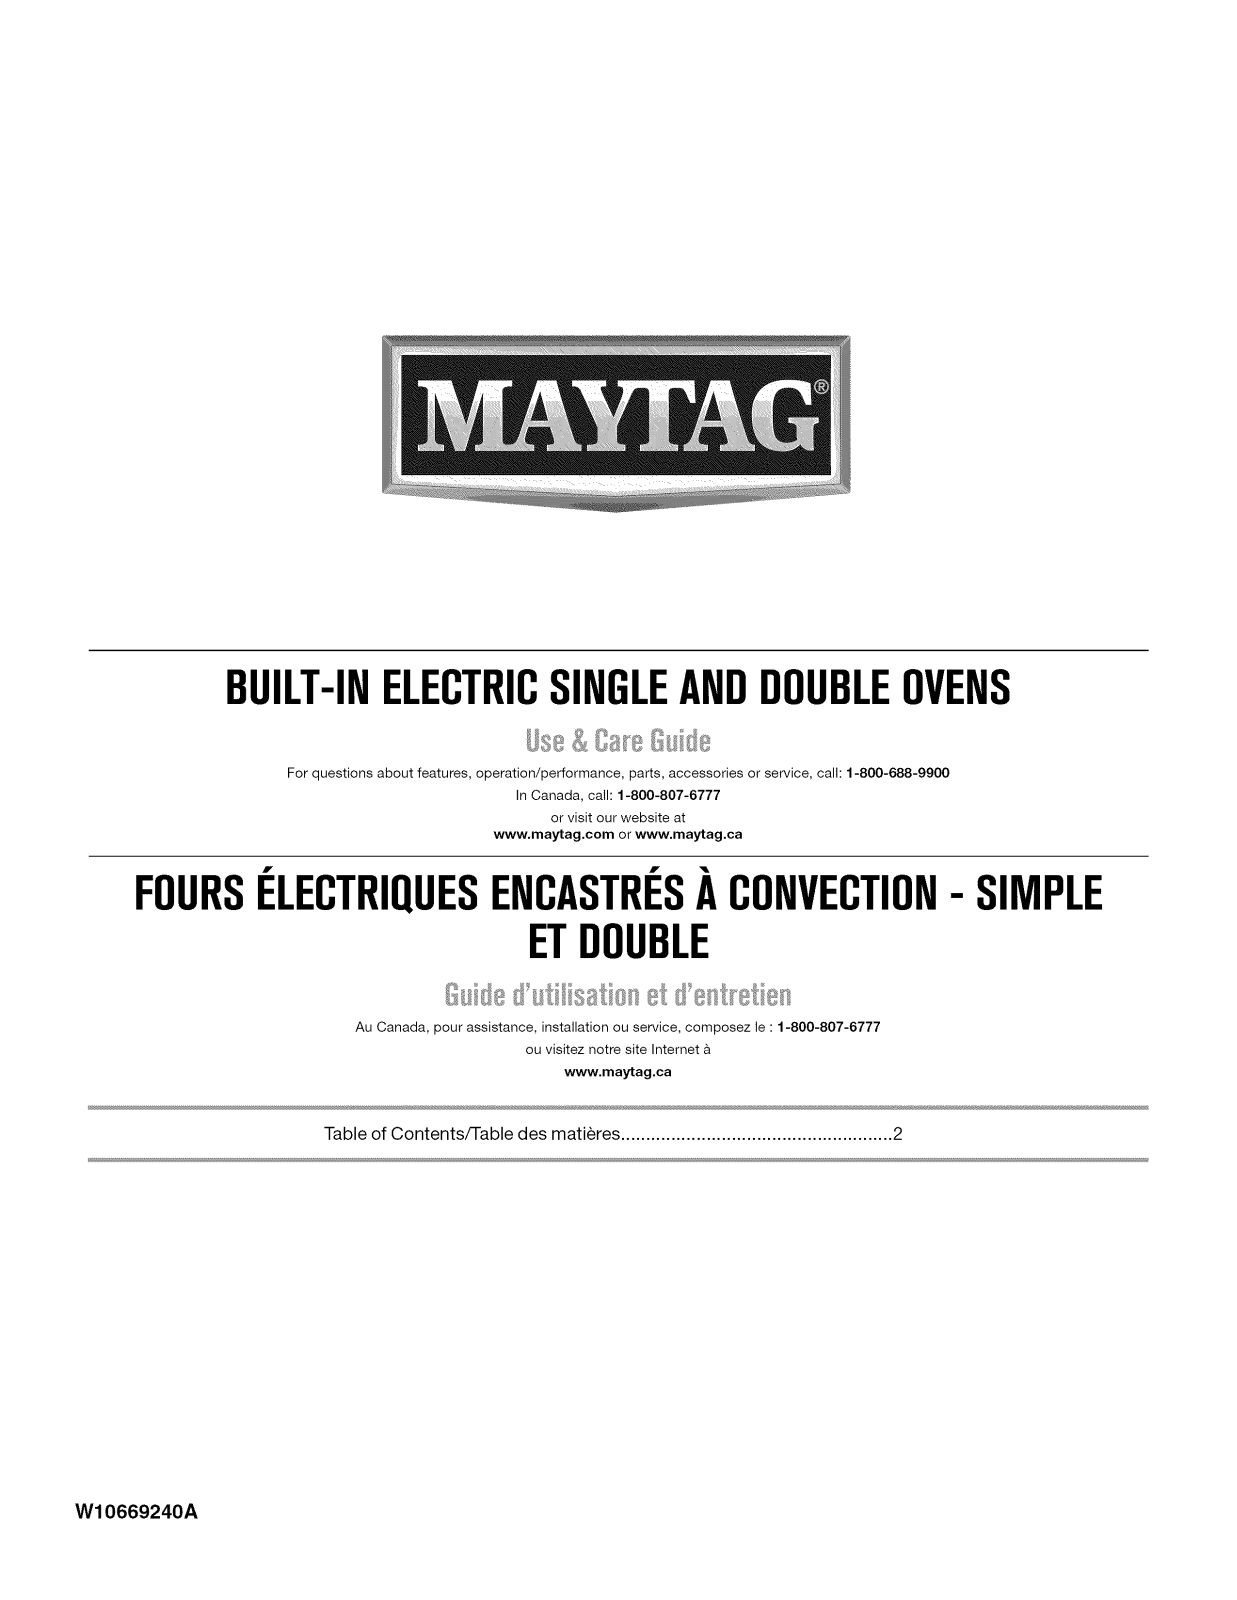 Maytag MEW7630DS00, MEW7630DH00, MEW7630DE00, MEW7627DS00, MEW7627DH00 Owner’s Manual